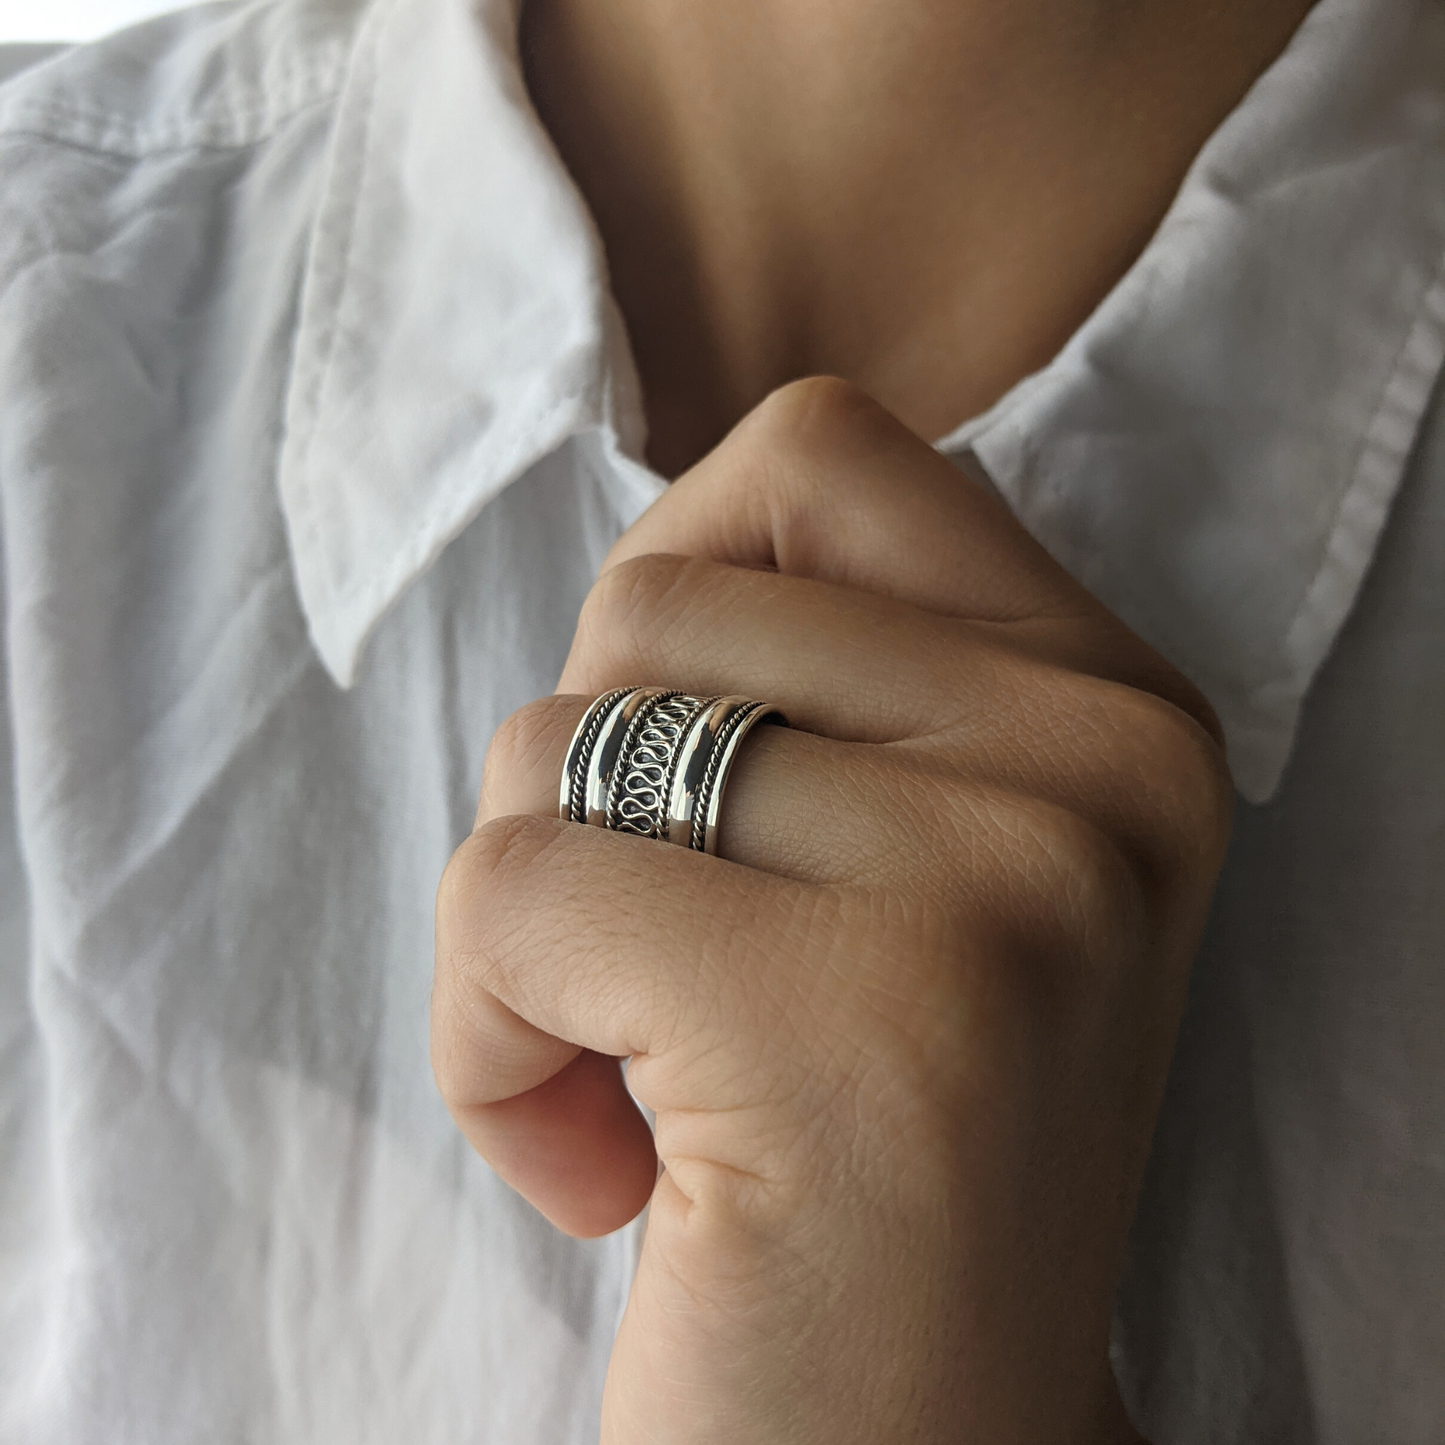 Buy Chevron Silver Band Ring from Online Shop | FOURSEVEN